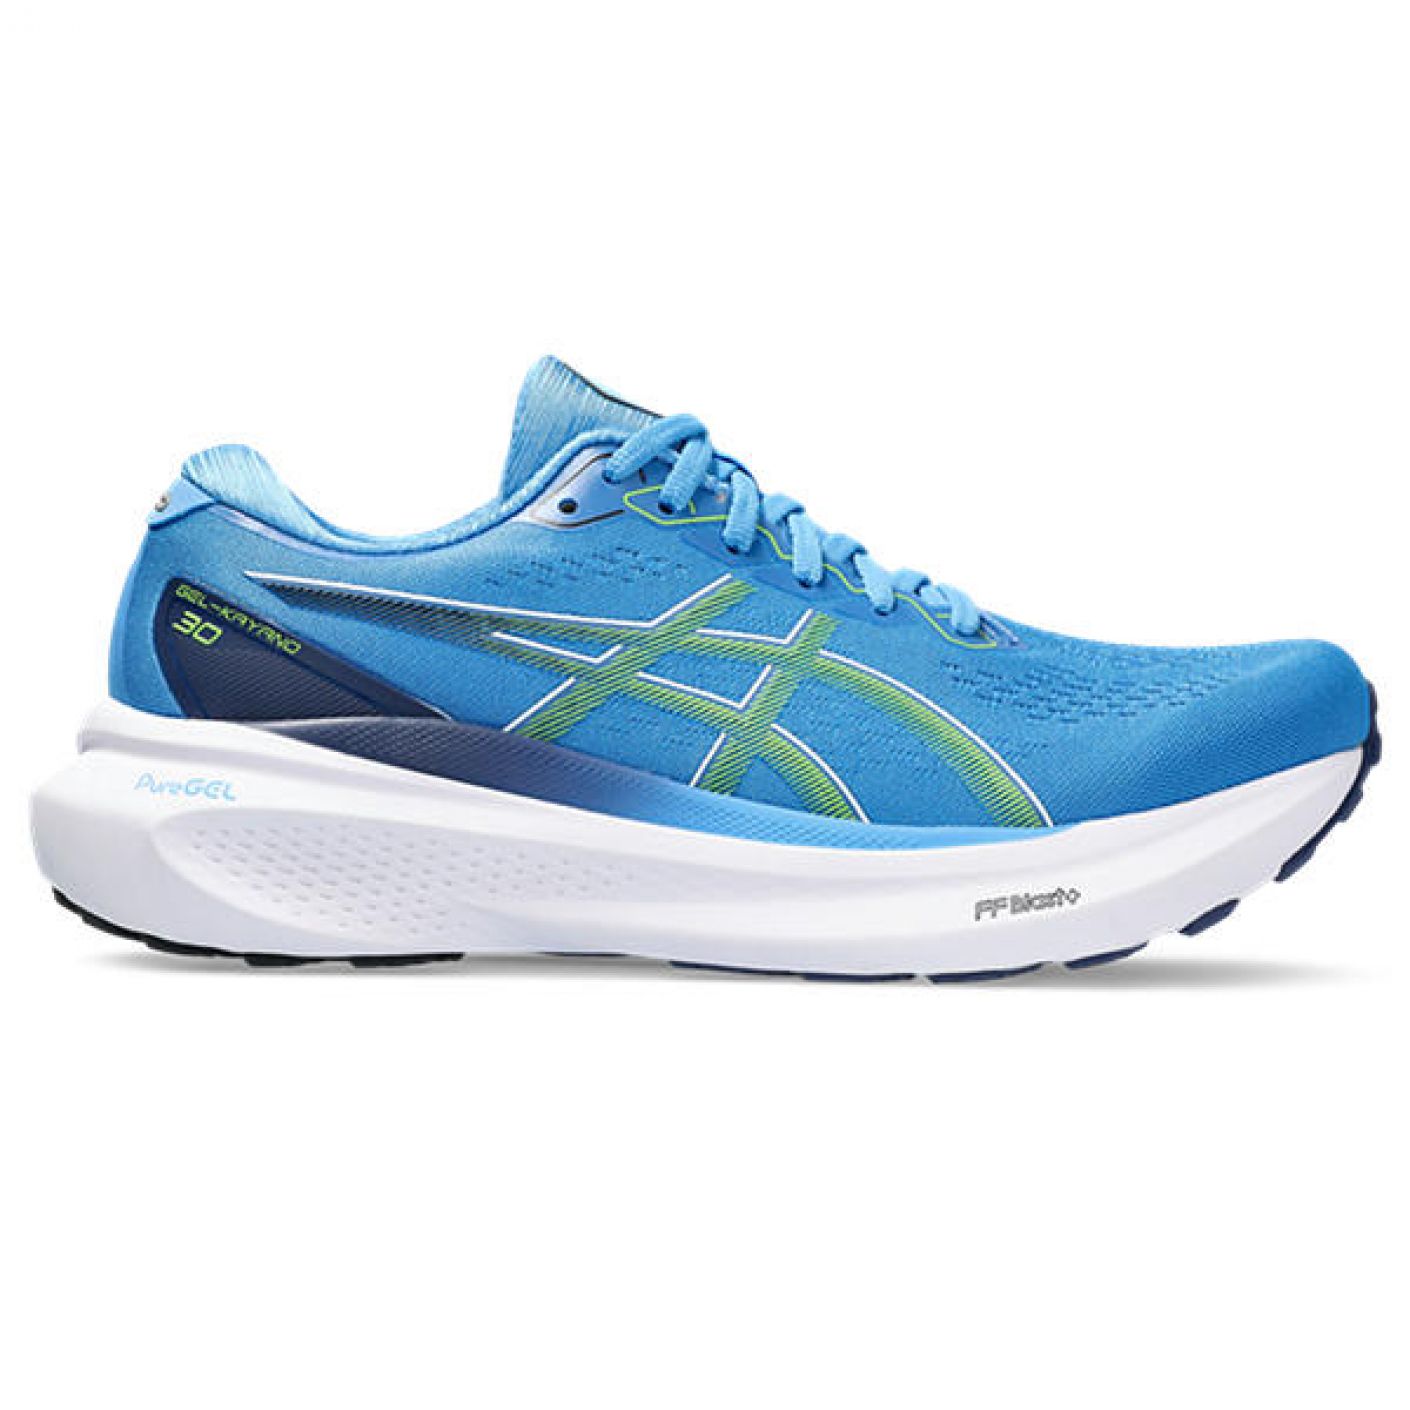 Asics Gel Kayano 30 Waterscape/Electric Lime for Men